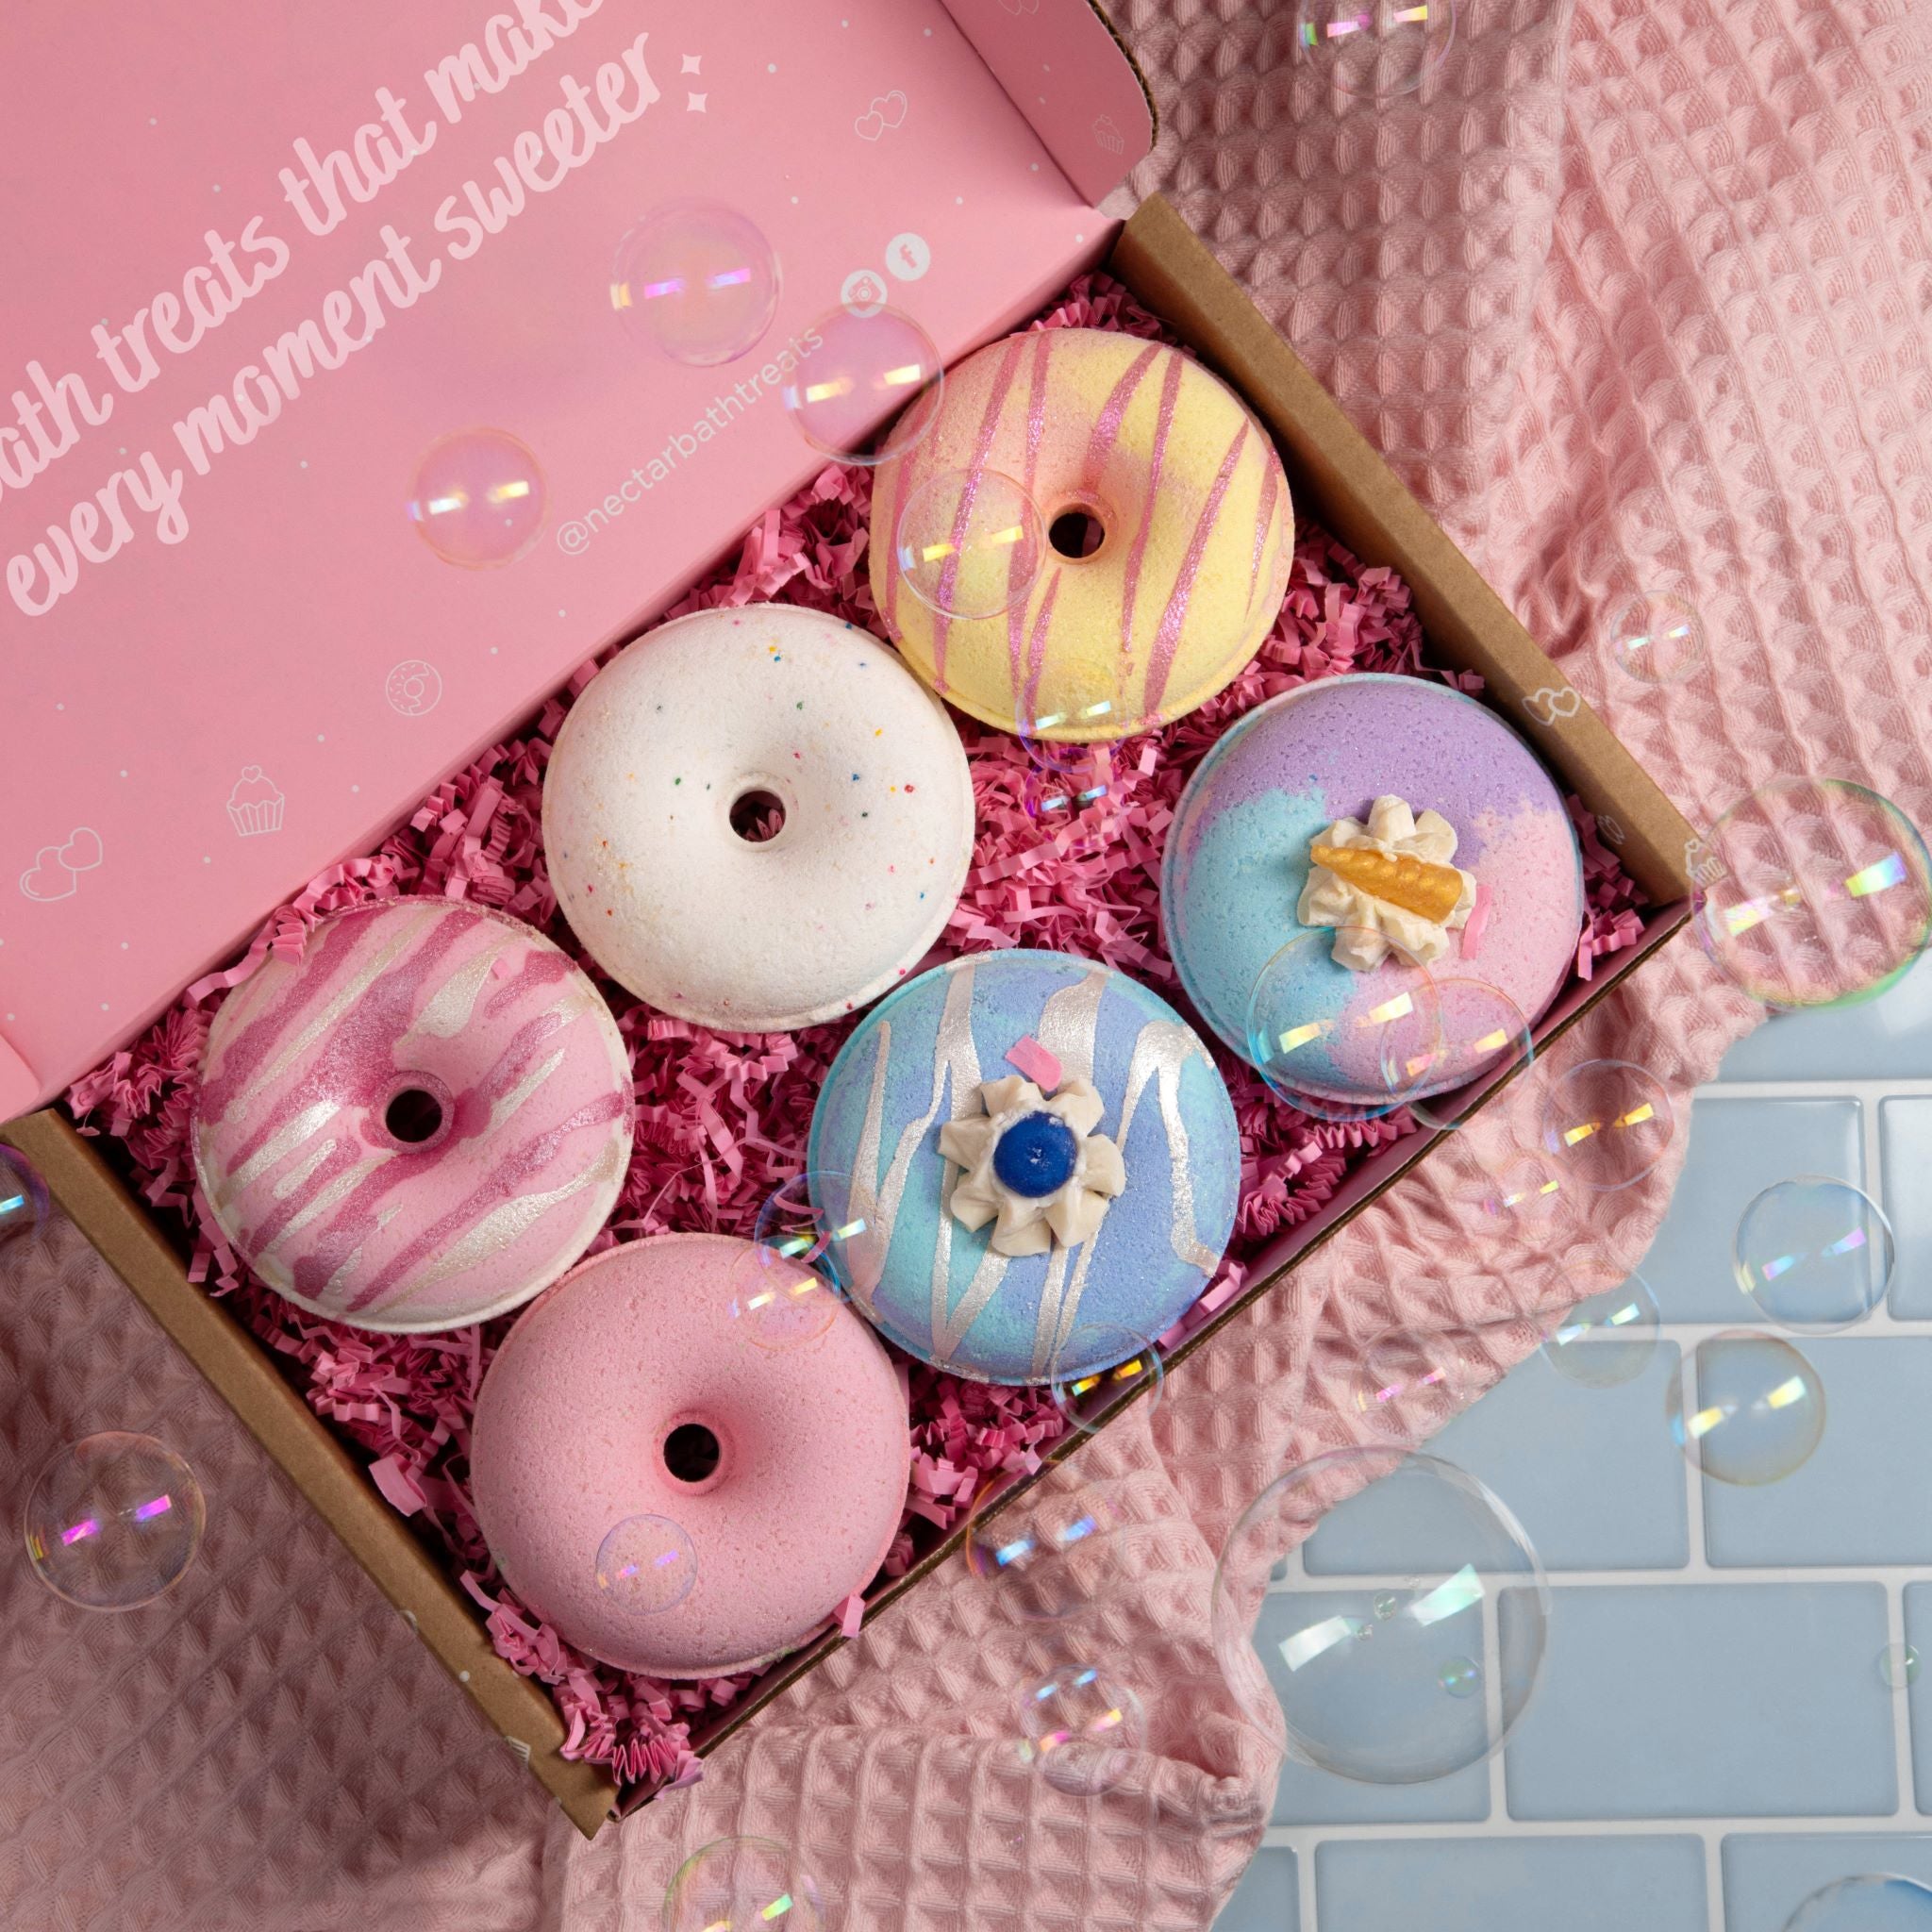 donut delights bath bomb self care gifts lifestyle 